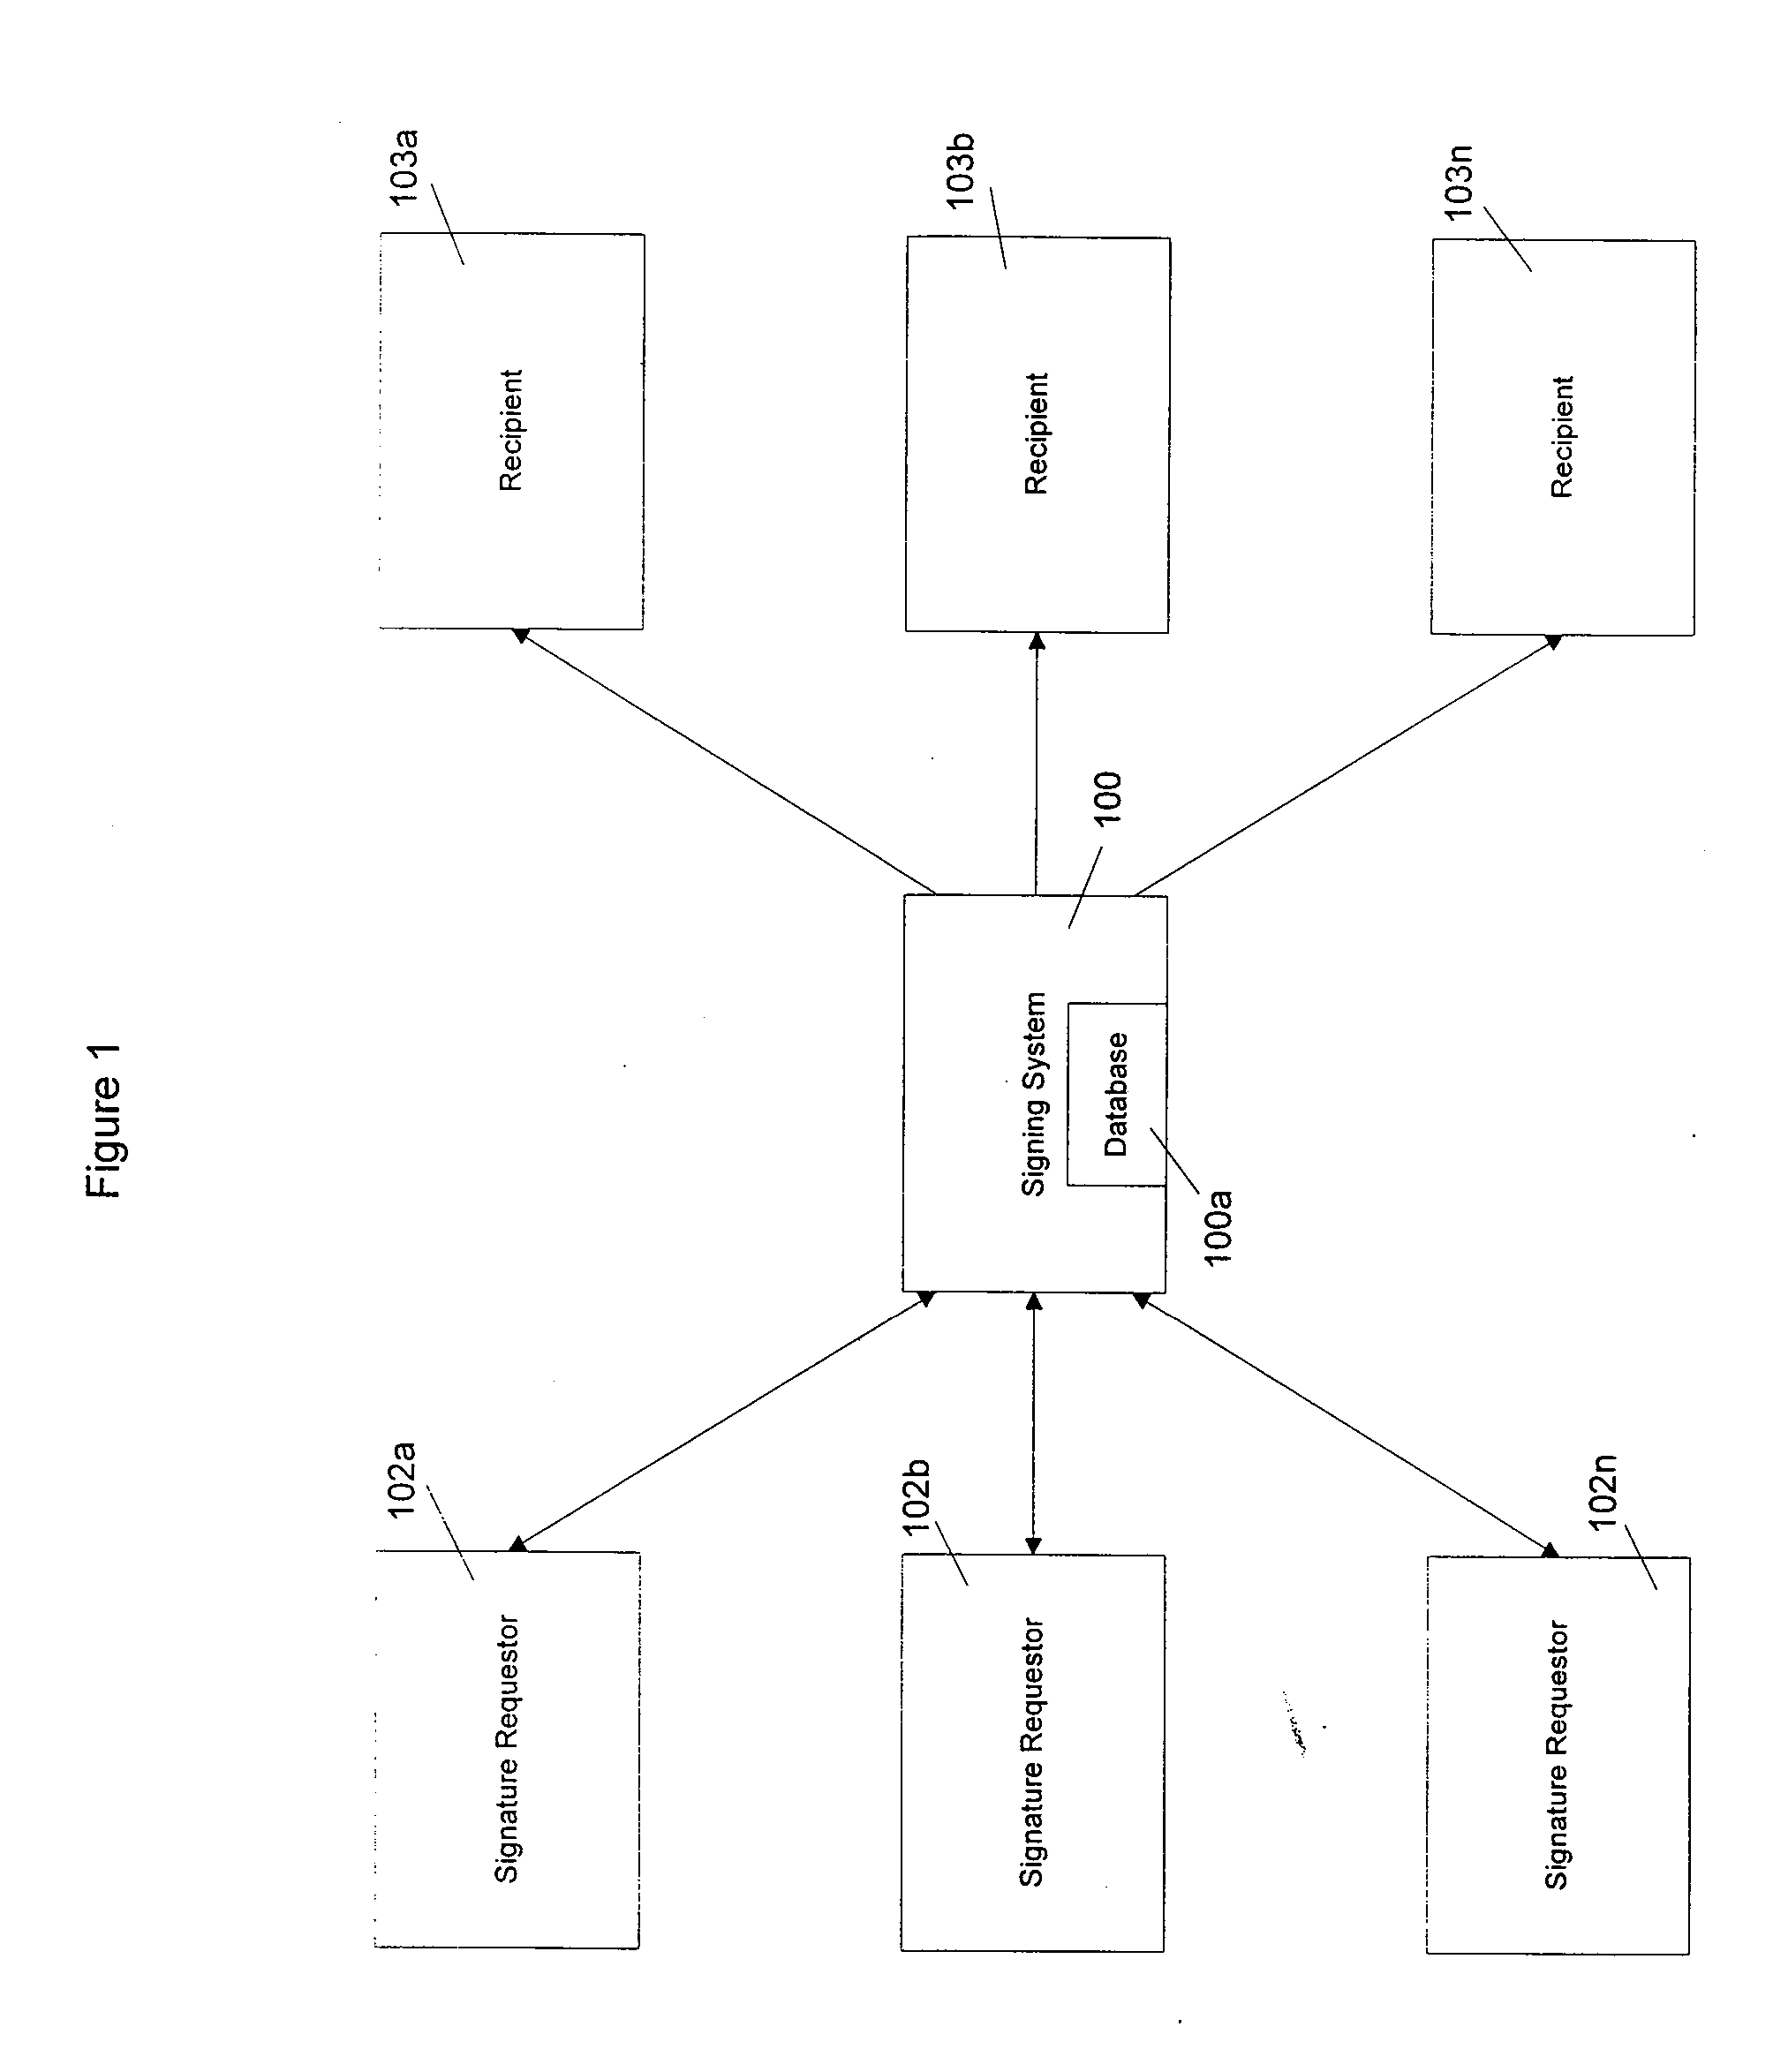 Method and System for Obtaining Digital Signatures